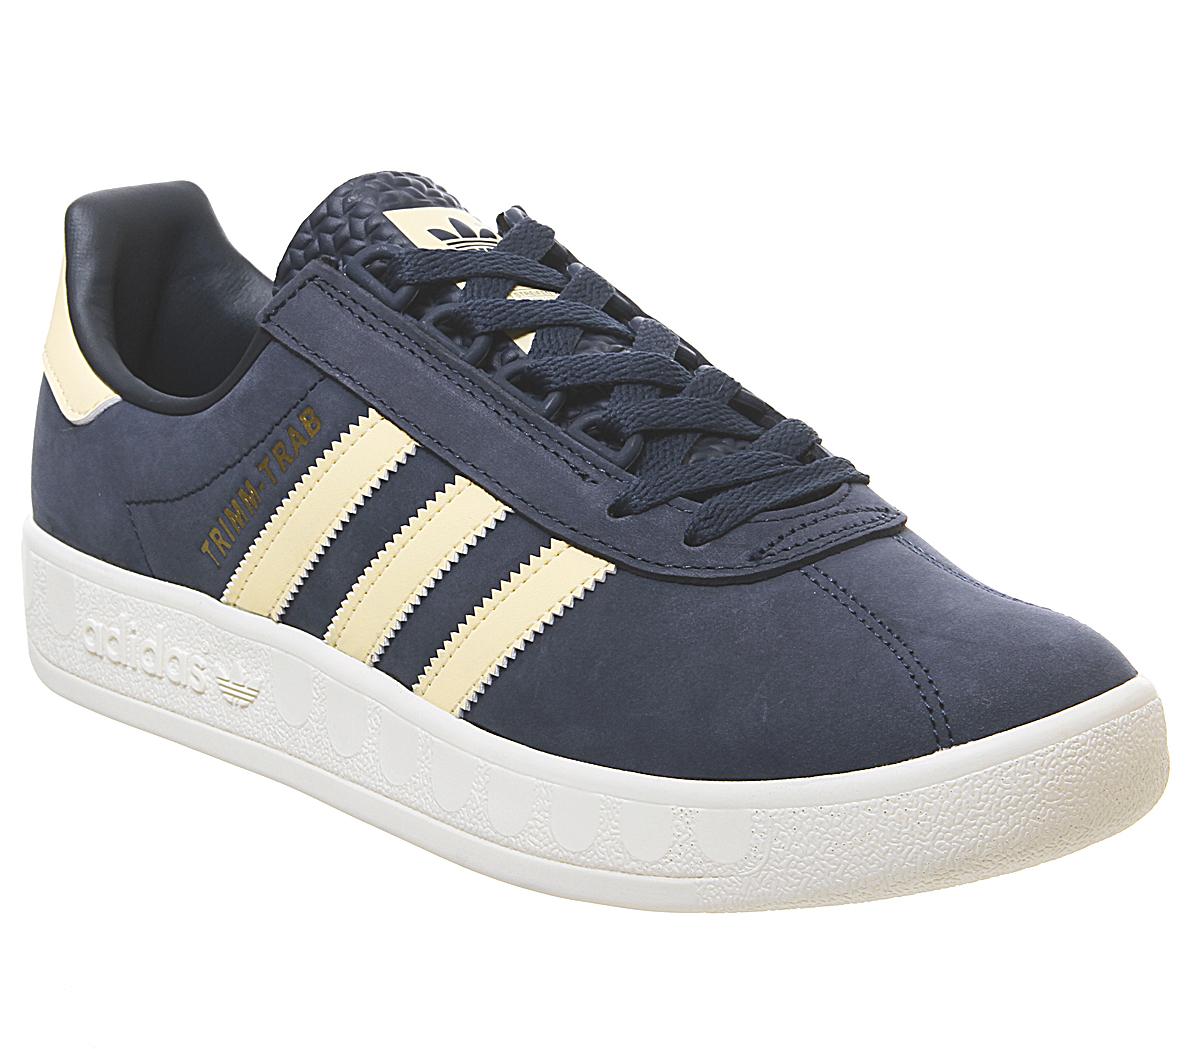 where can i buy adidas trimm trab trainers